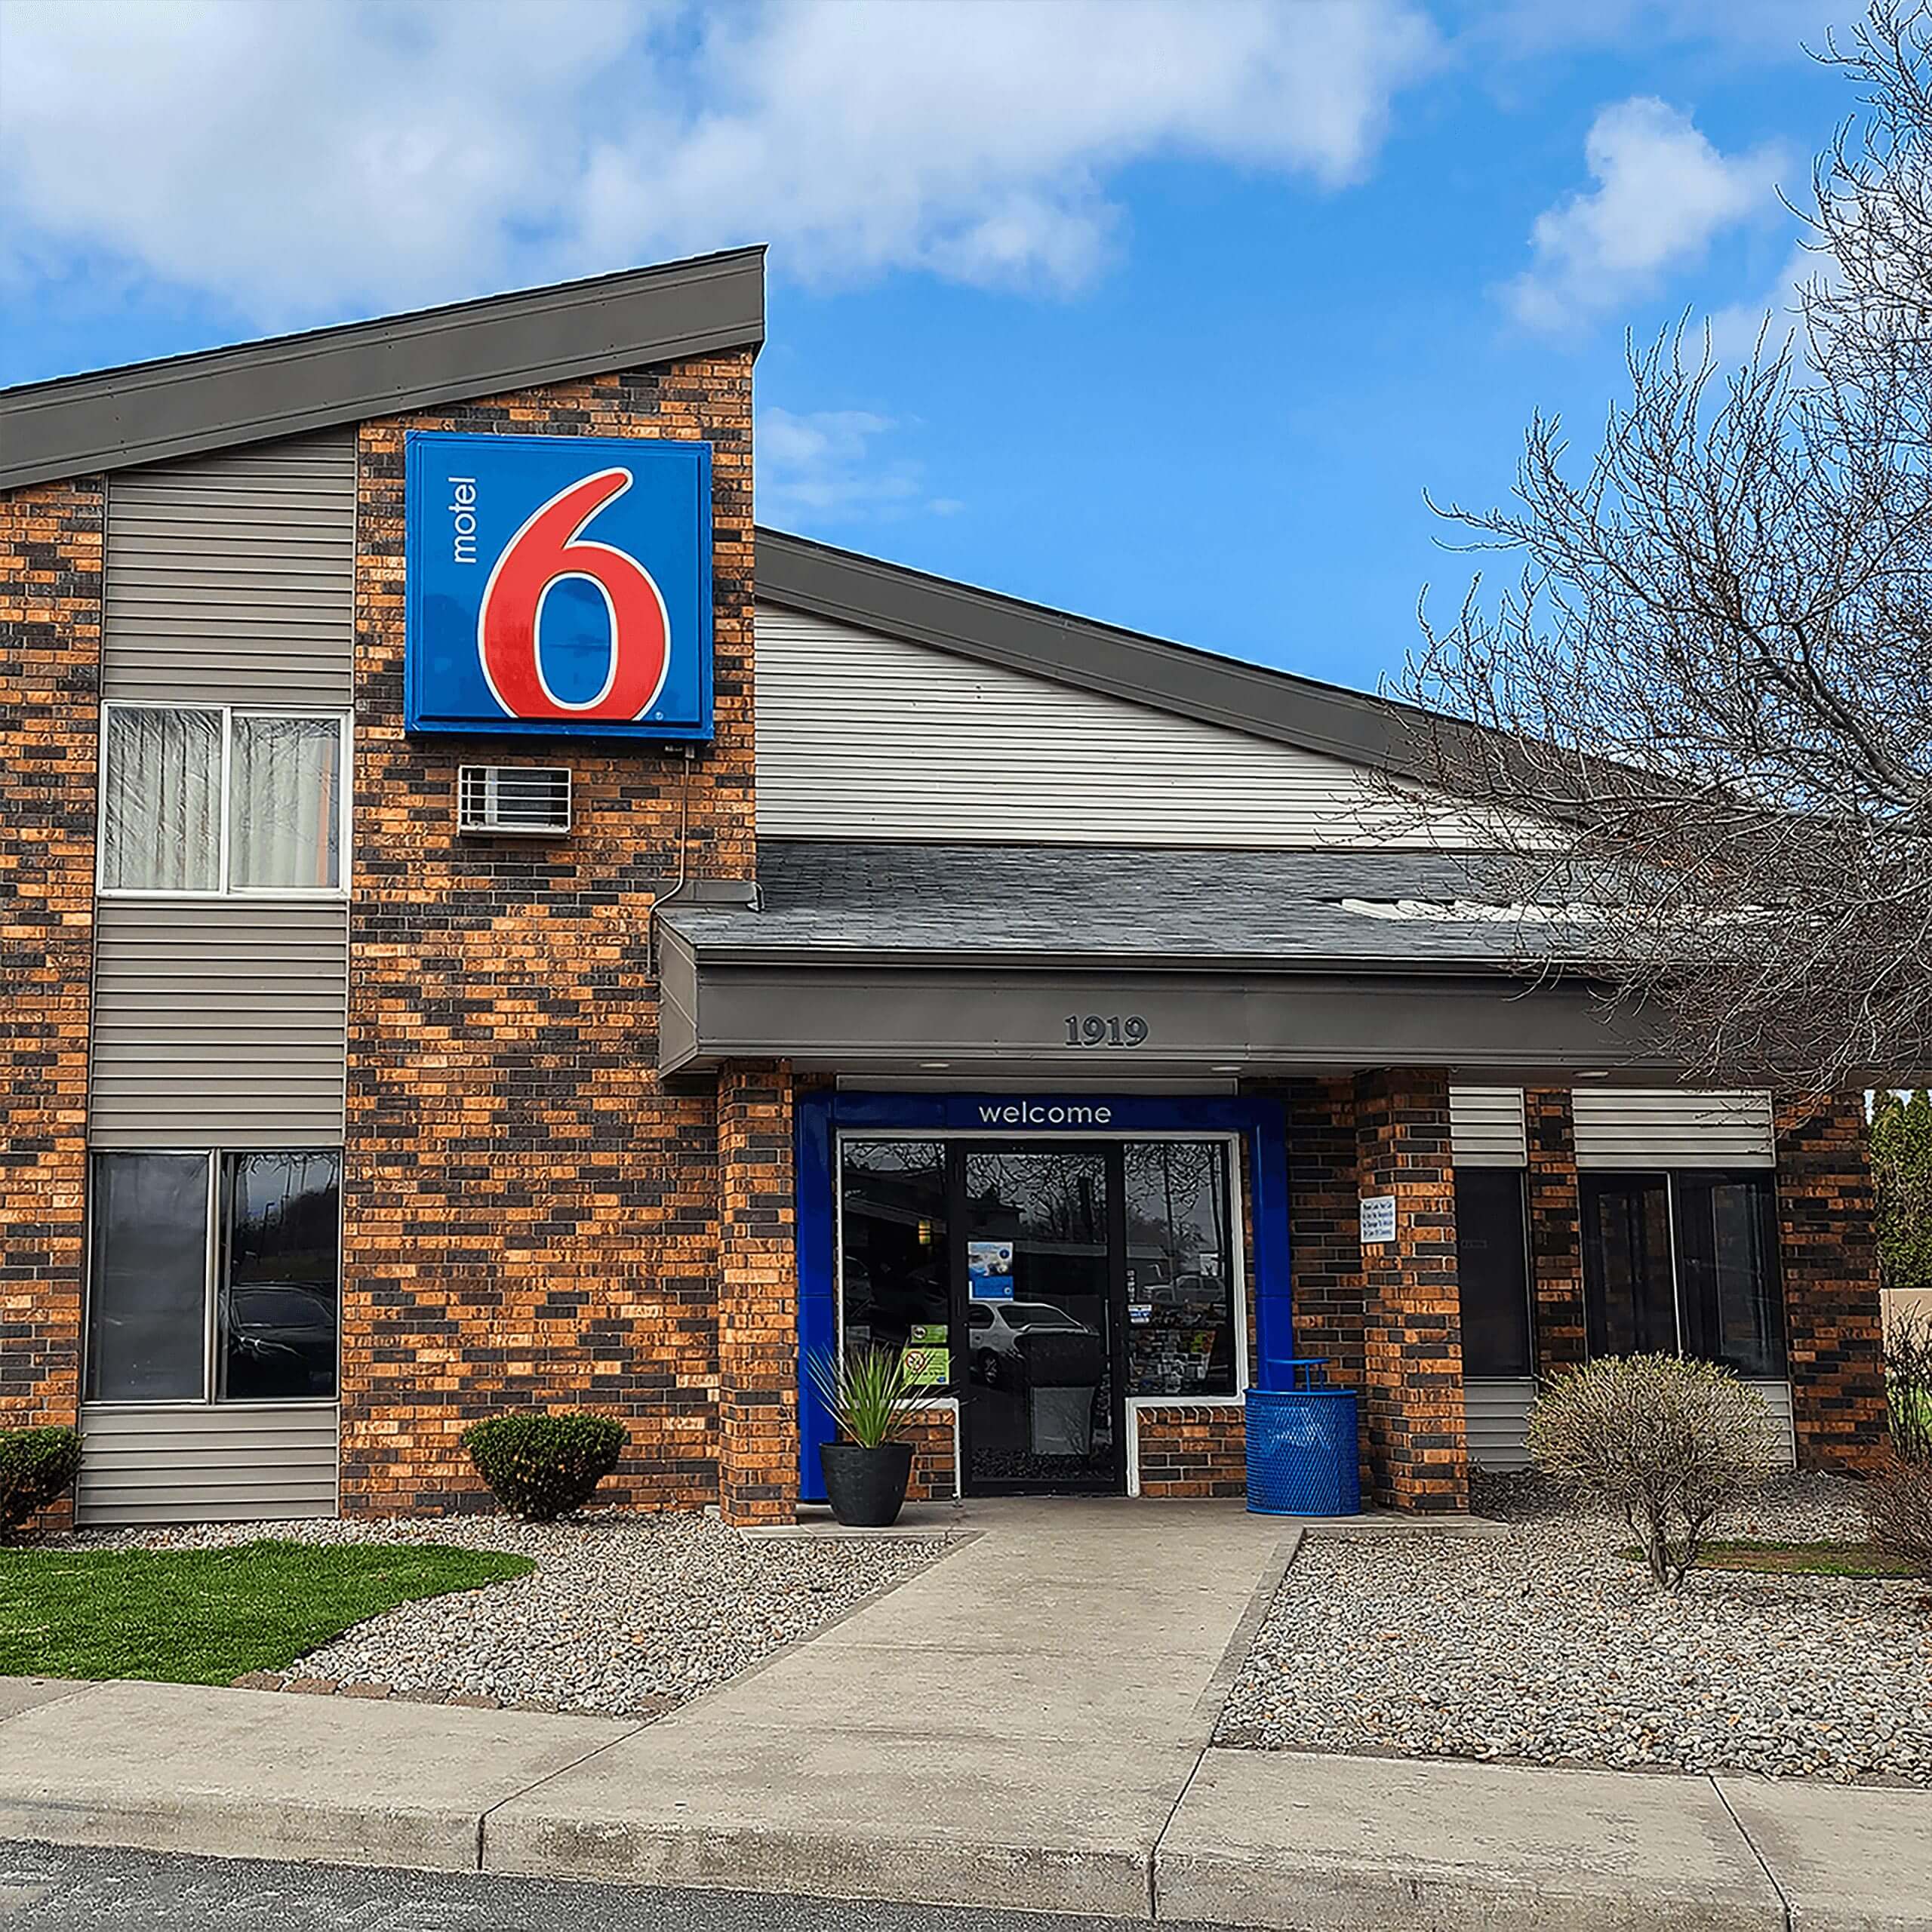 The signage of a Motel6 building.